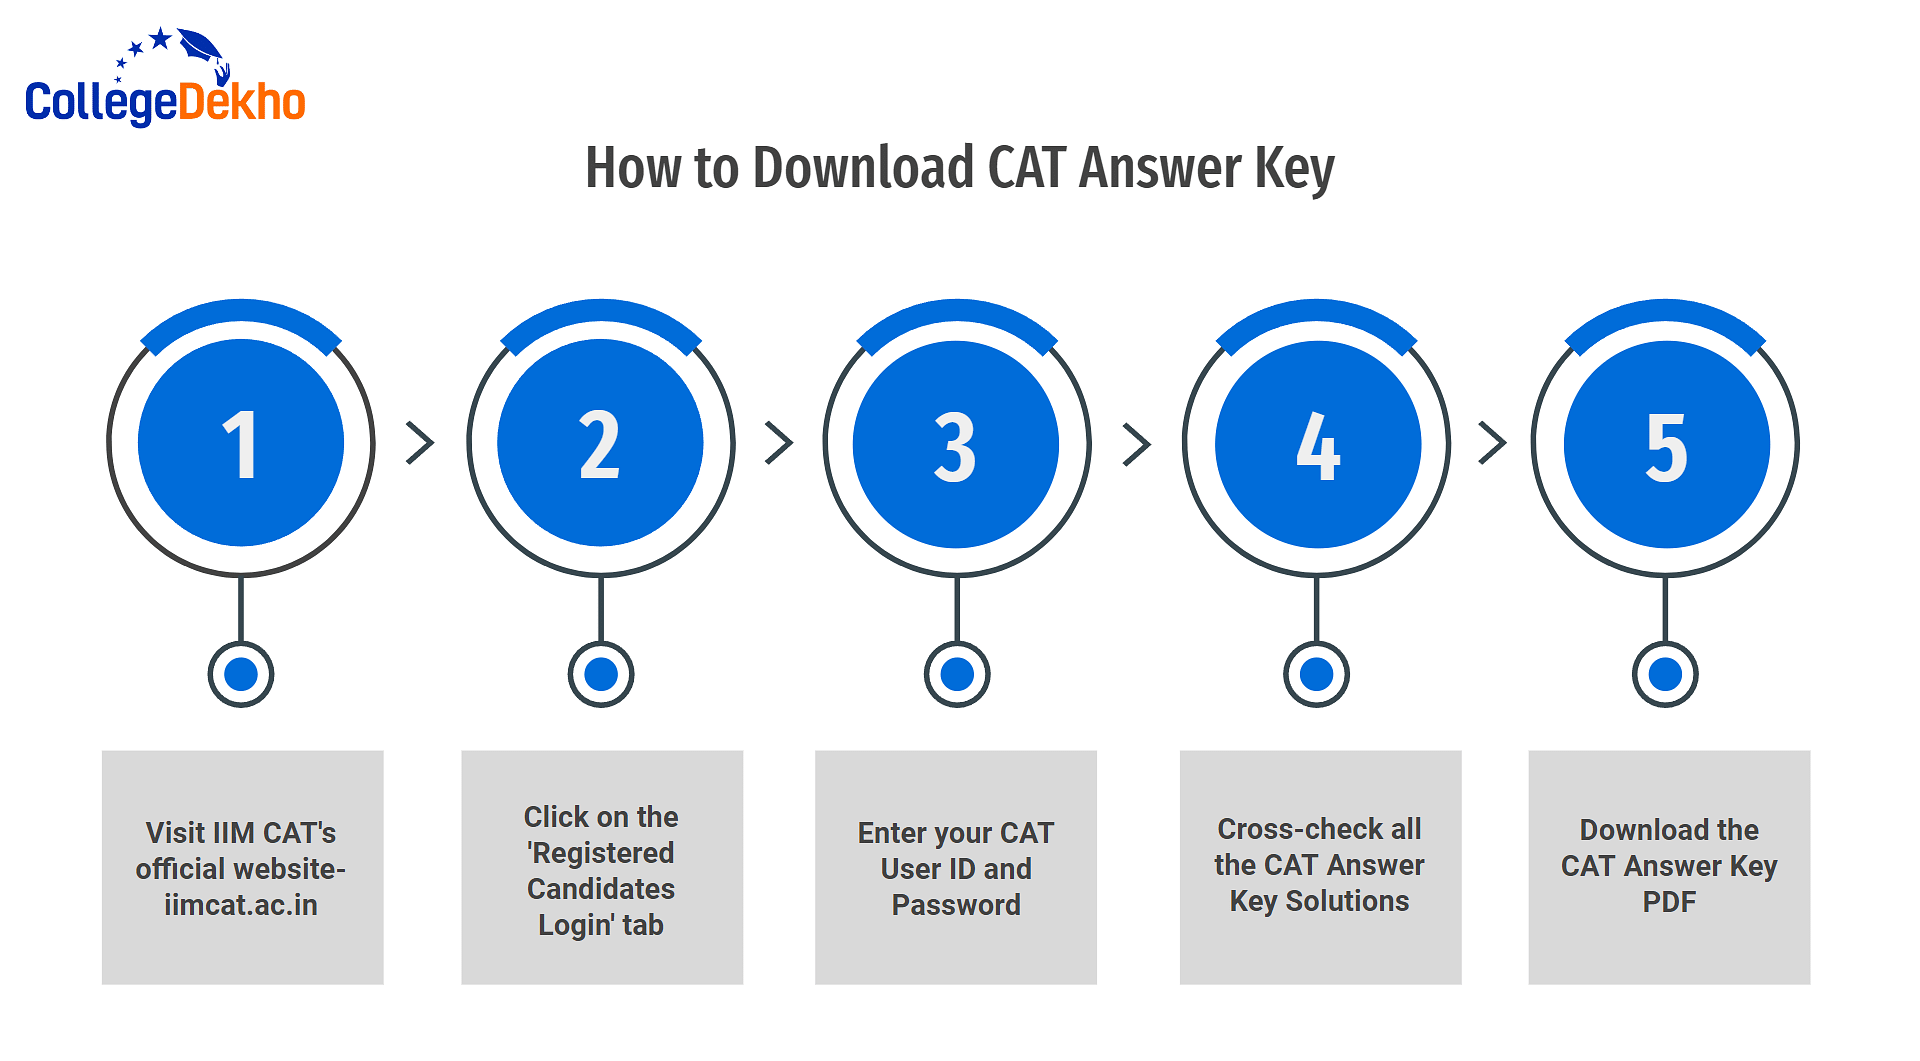 How to Download CAT Answer Key